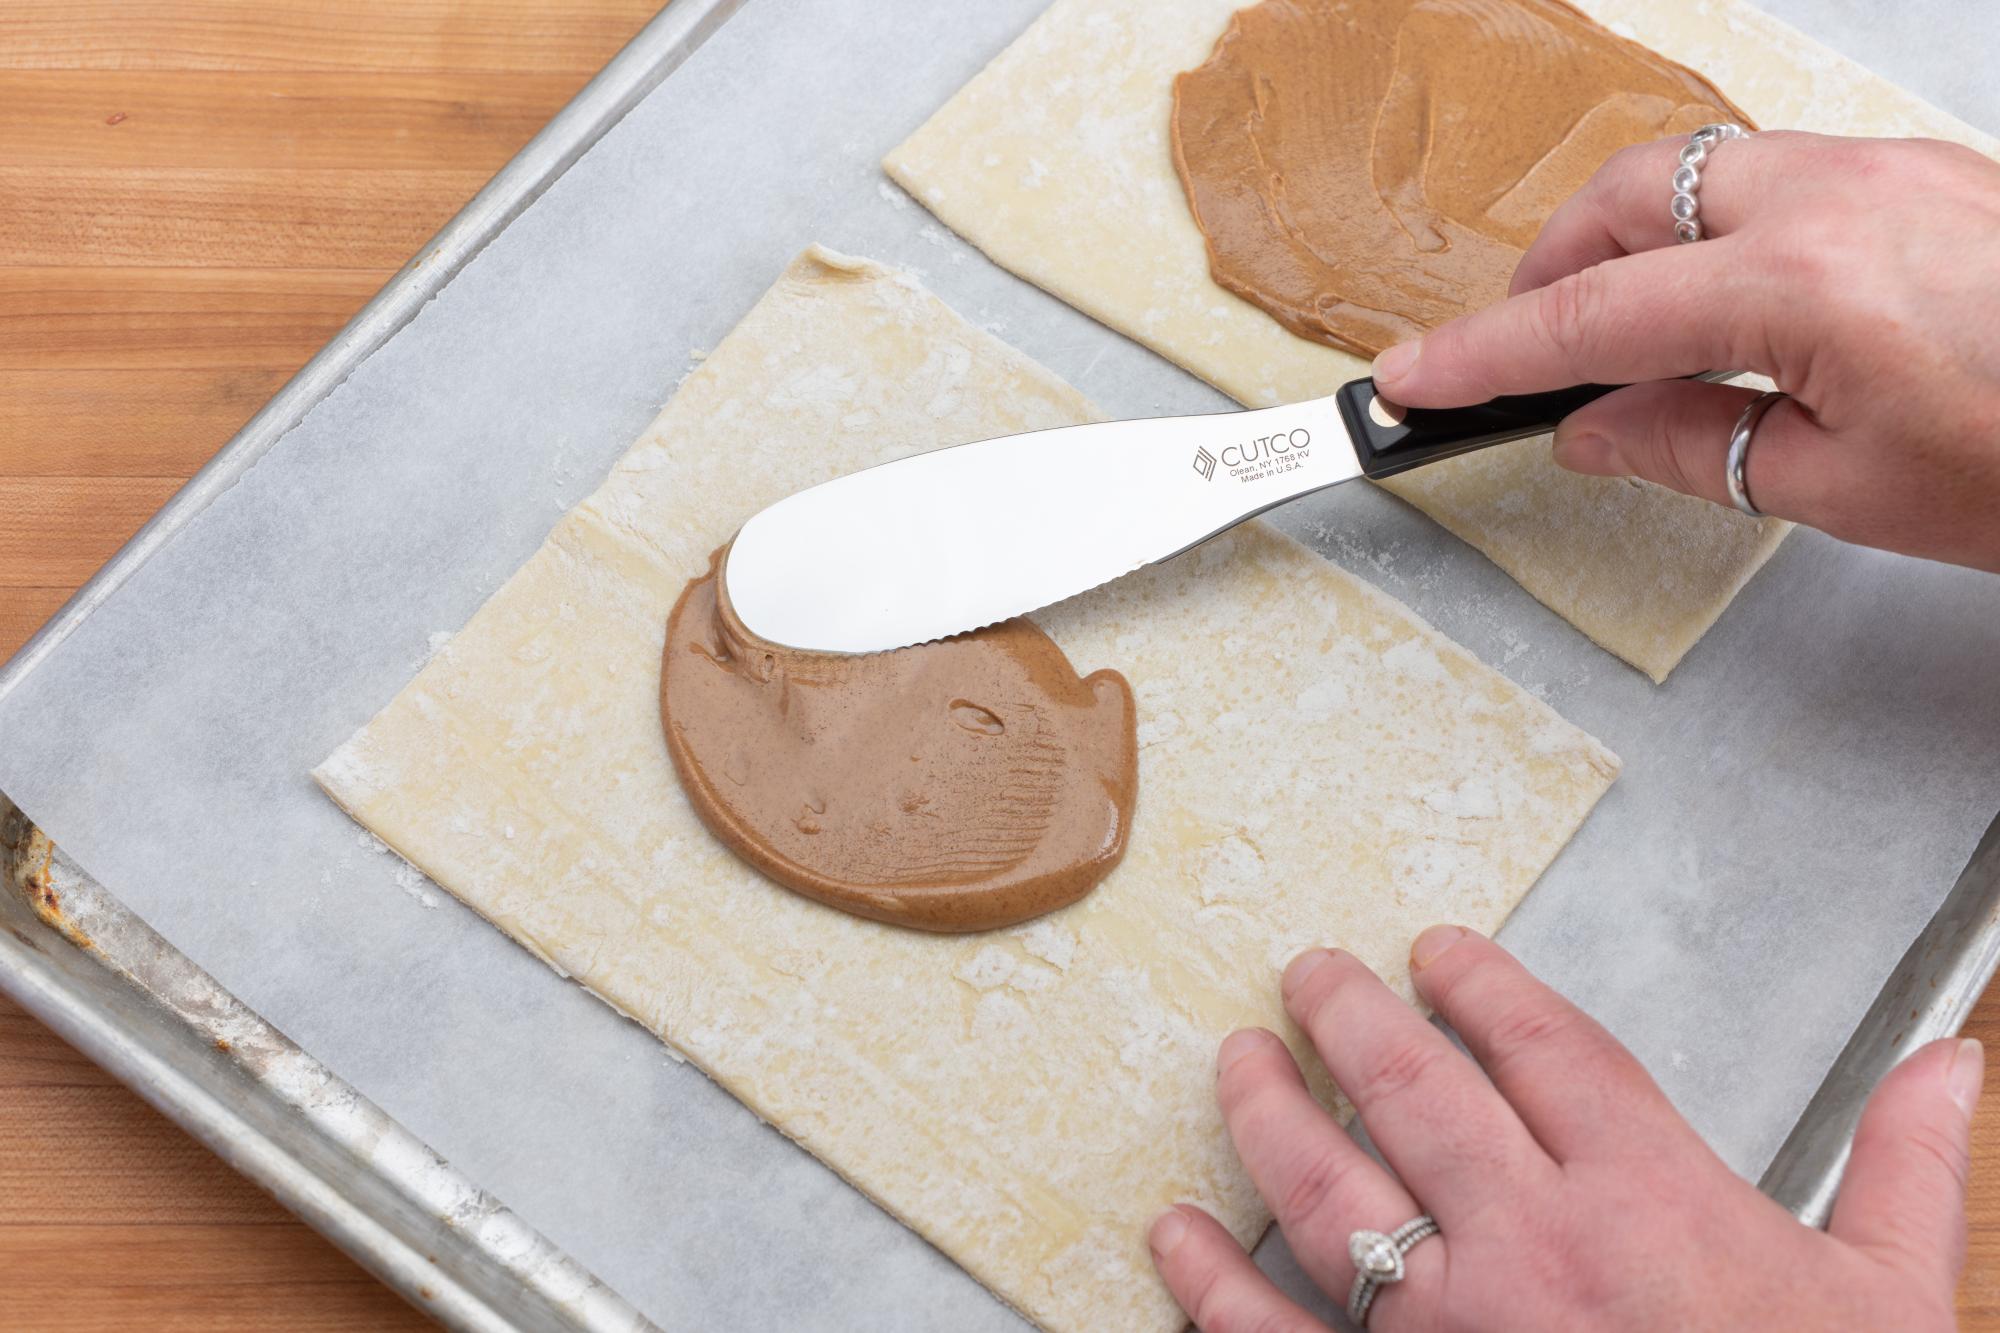 Using the Spatula Spreader to spread the almond butter.